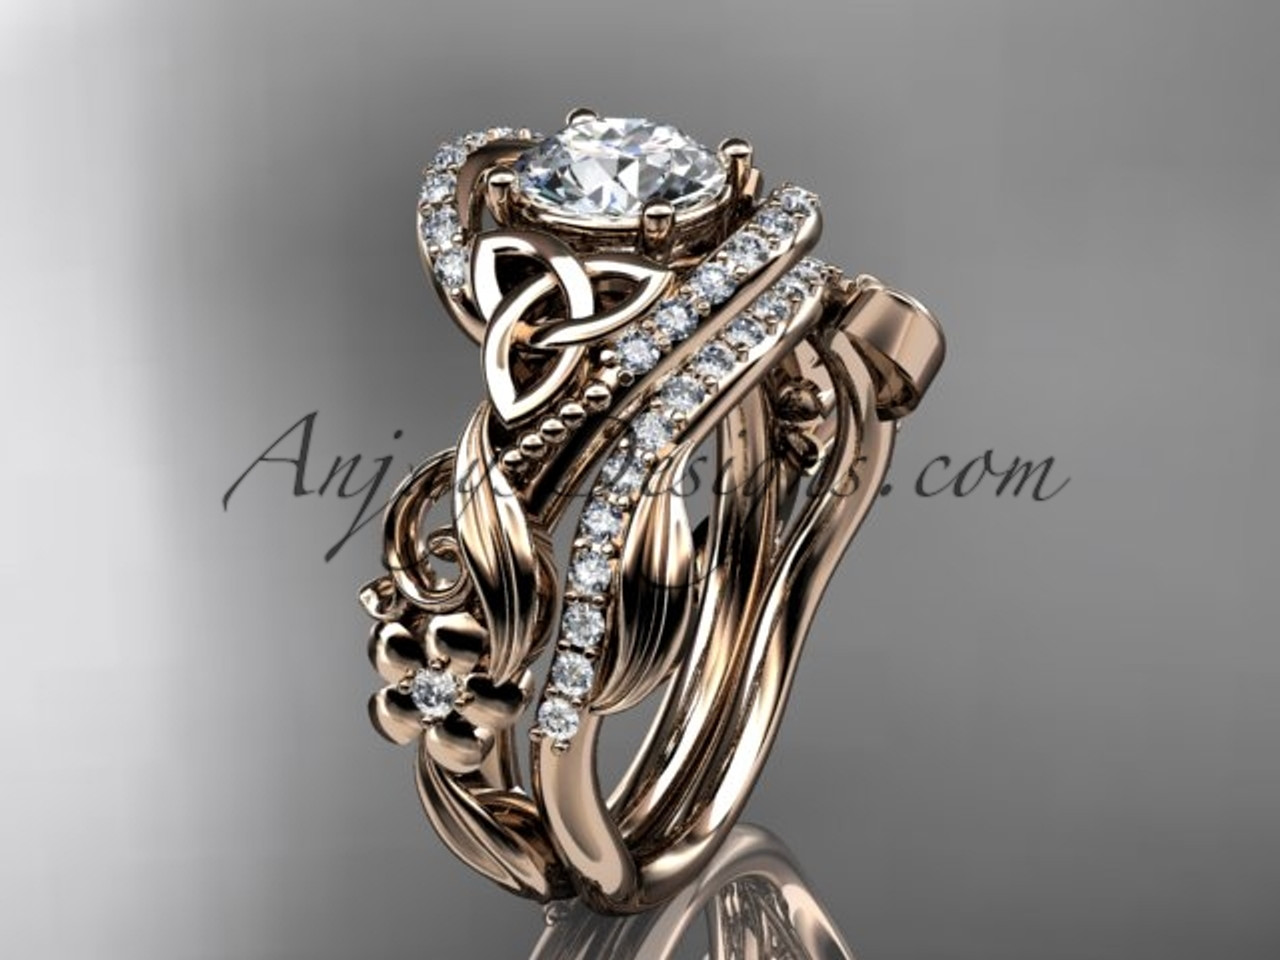 Buy Ring Sets Online in India - Ring Online Shopping - Sukkhi.com